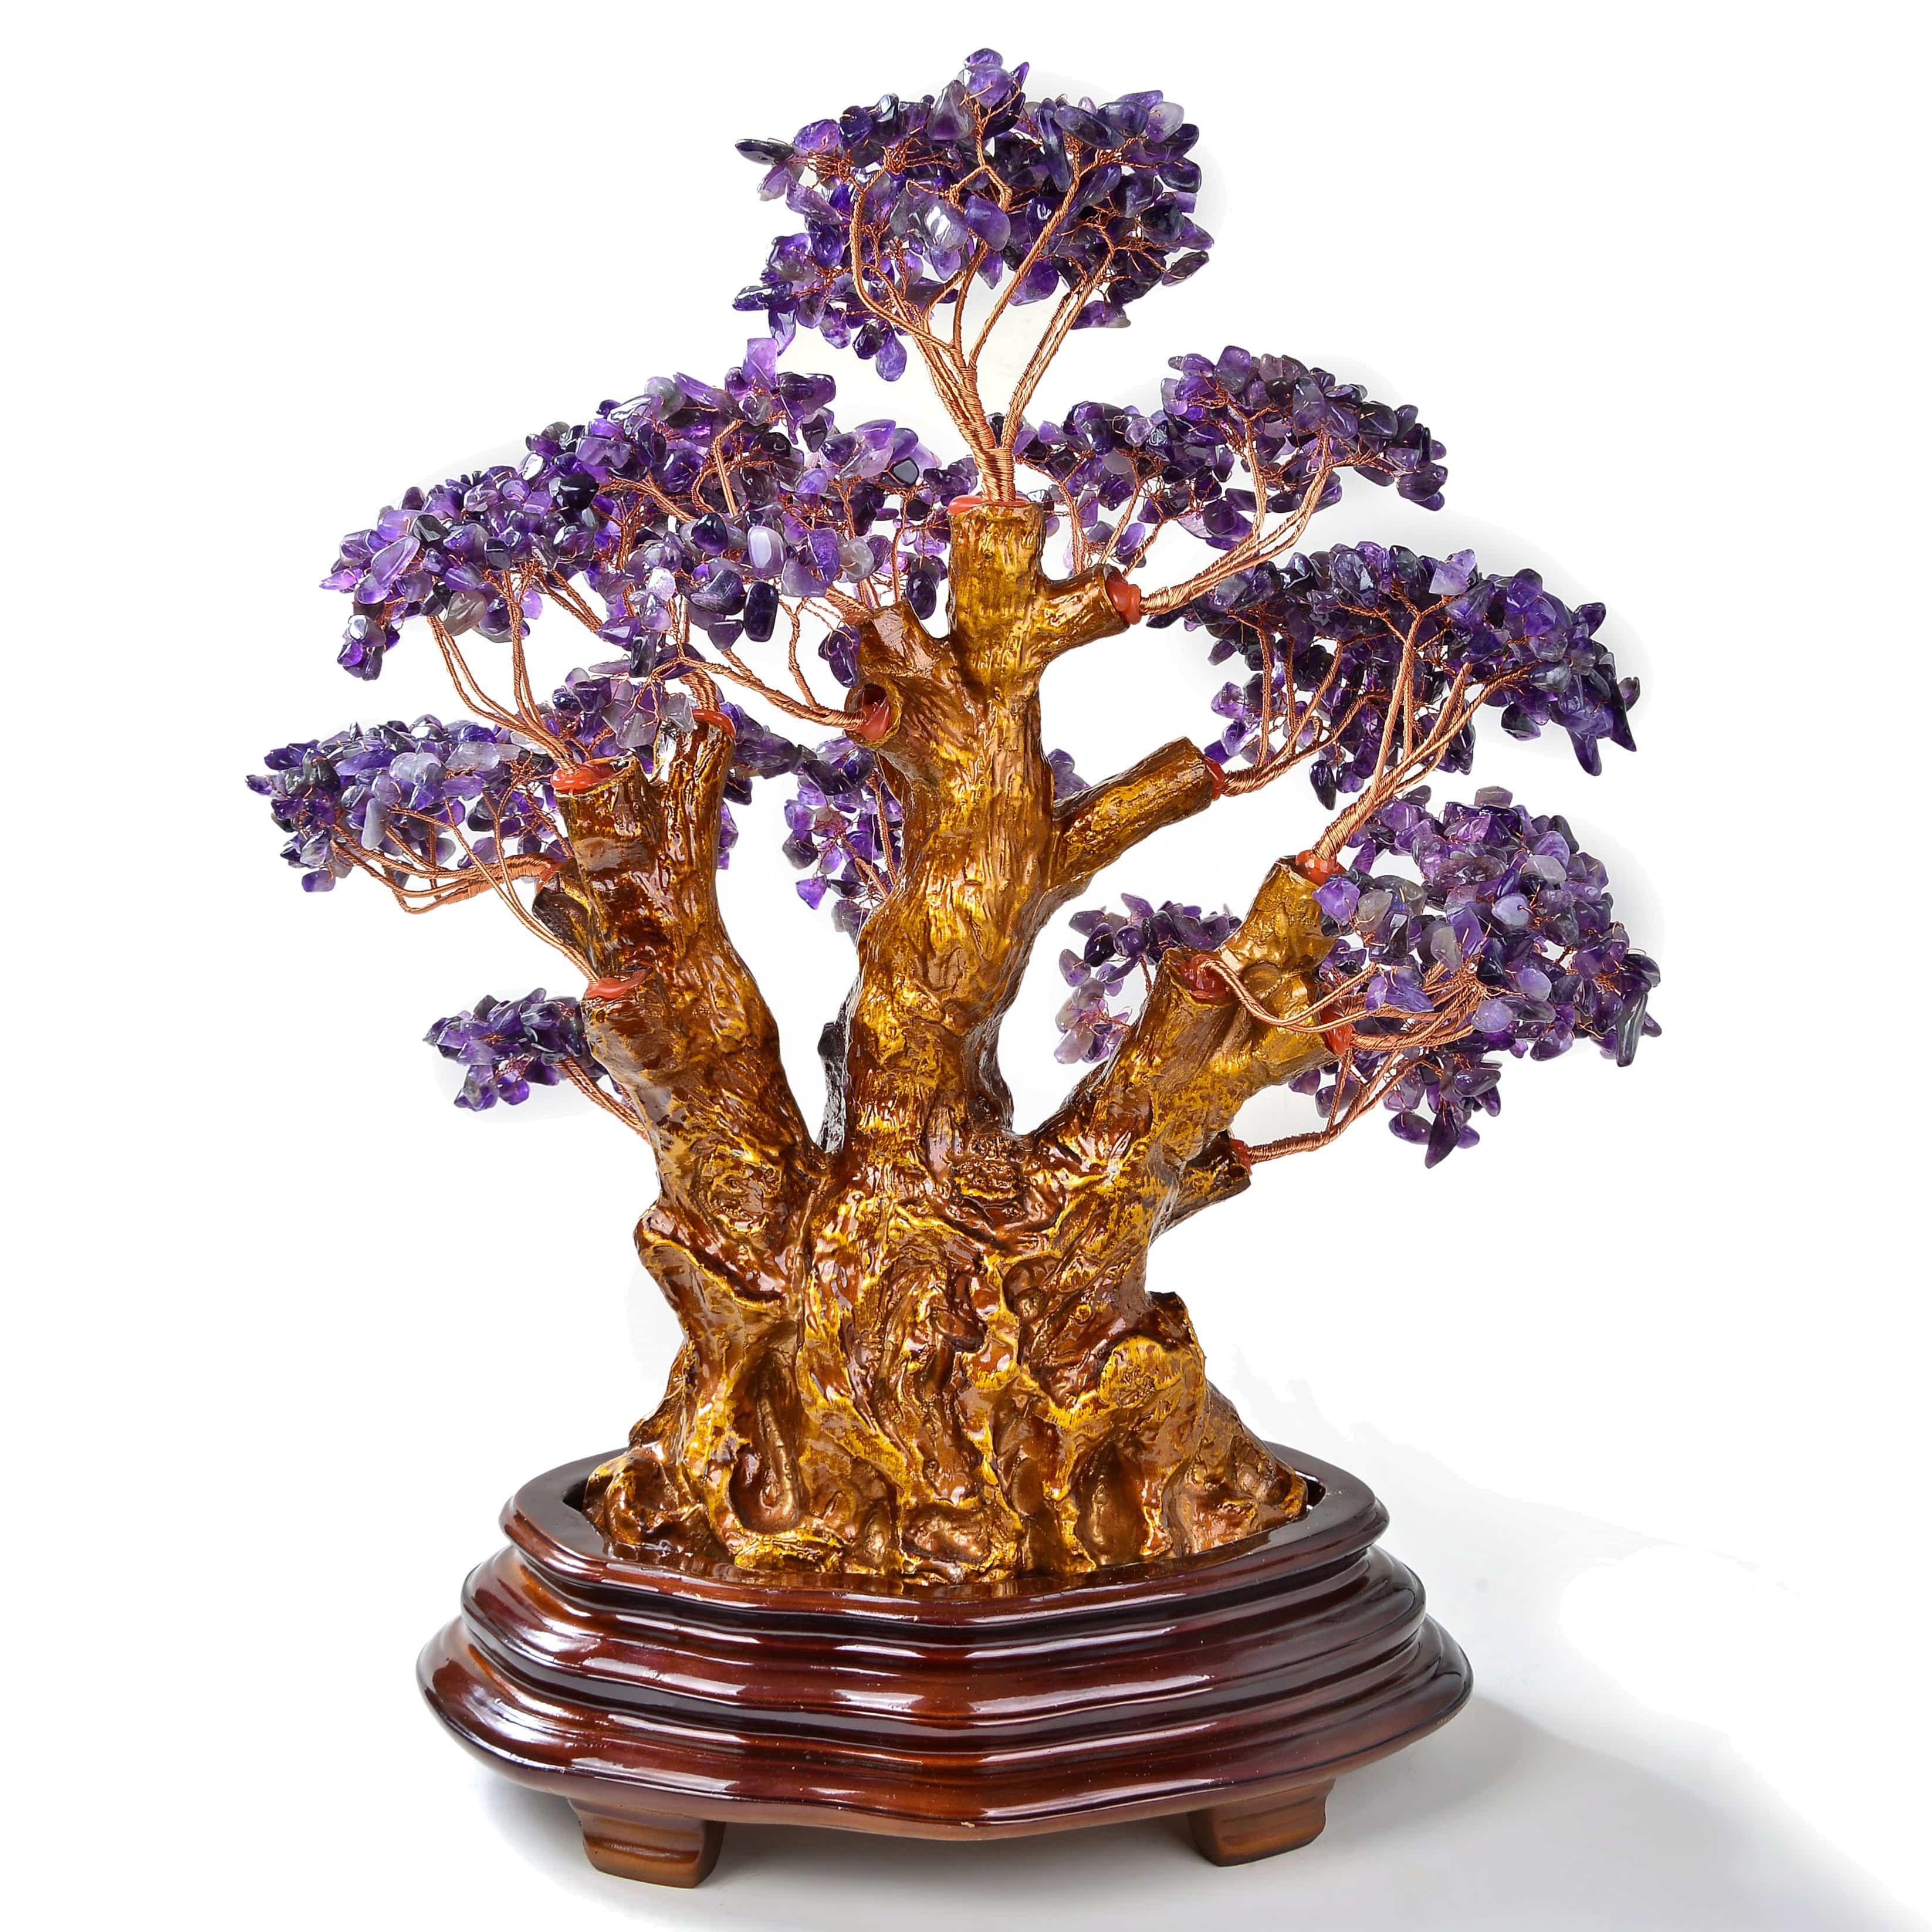 Kalifano Gemstone Trees Amethyst Tree of Life Centerpiece with over 2,000 Natural Gemstones K9800-AM